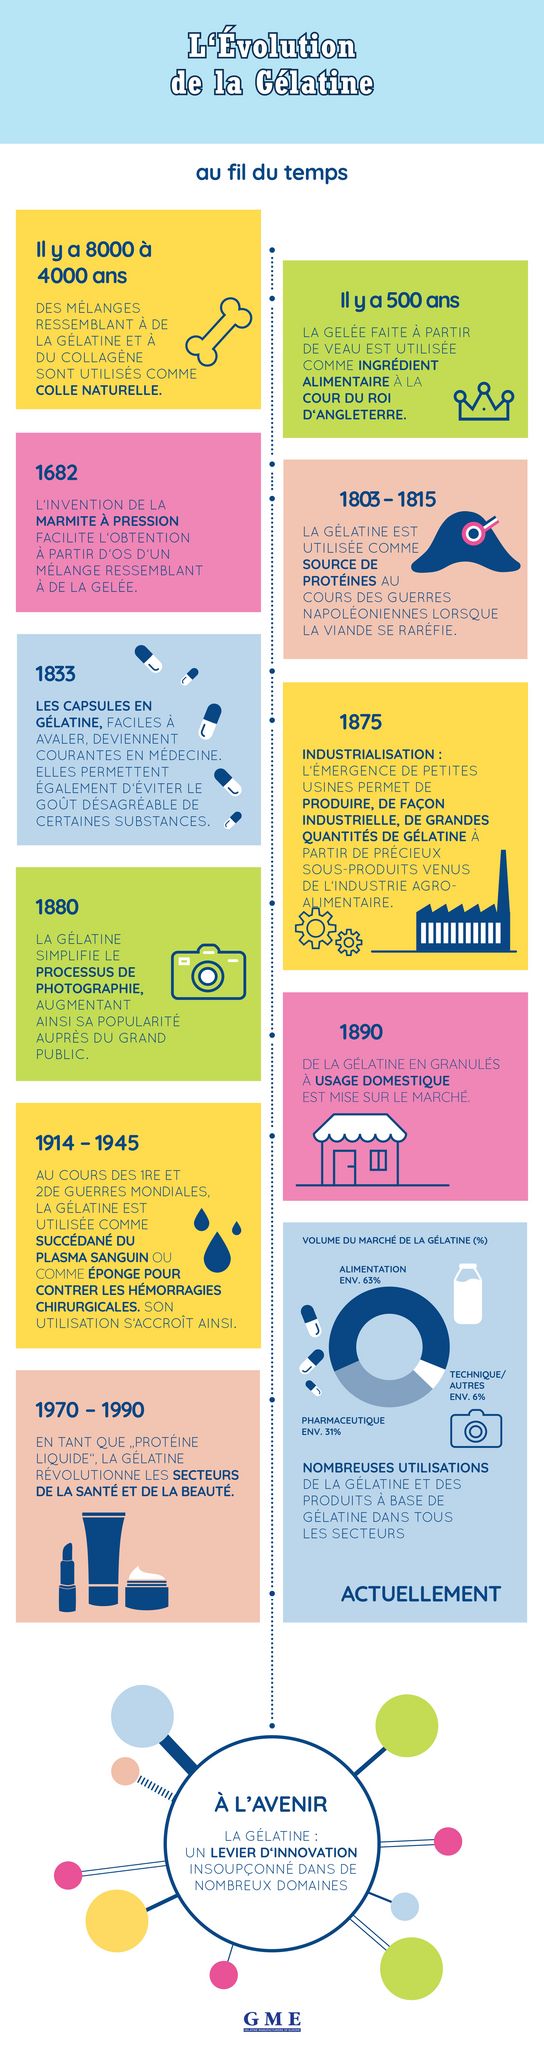 Infographic on the history of gelatine